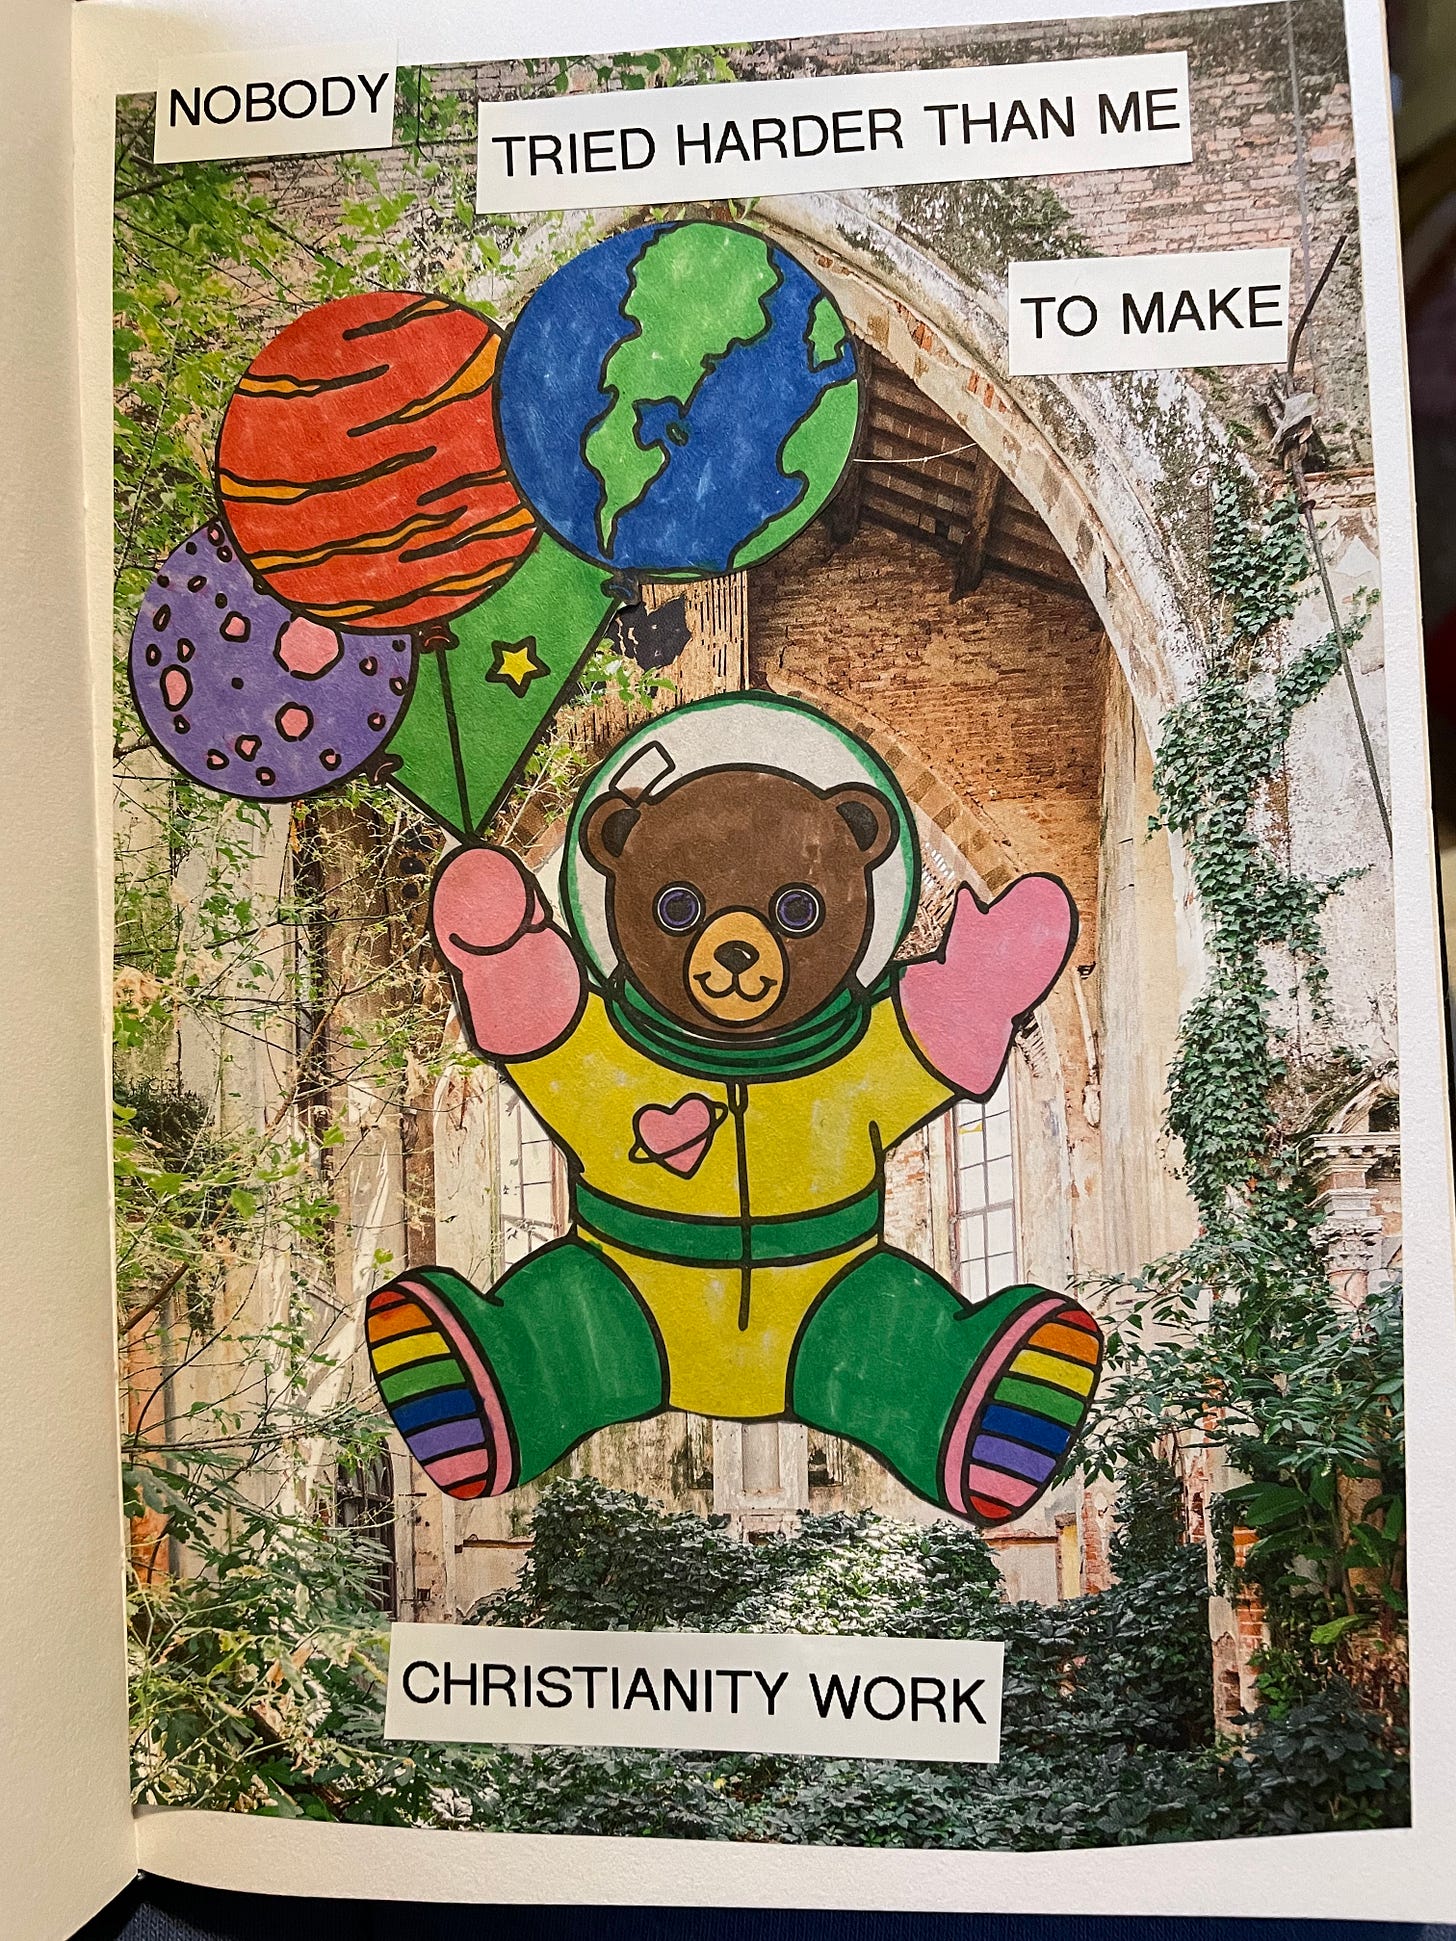 an art journal page with a picture of an old outdoor cathedral, all overgrown with greenery and a few brown wooden crosses stuck in the dirt. there is an image of a lisa frank bear holding three balloons pasted over the image. in text it says nobody tried harder than me to make christianity work